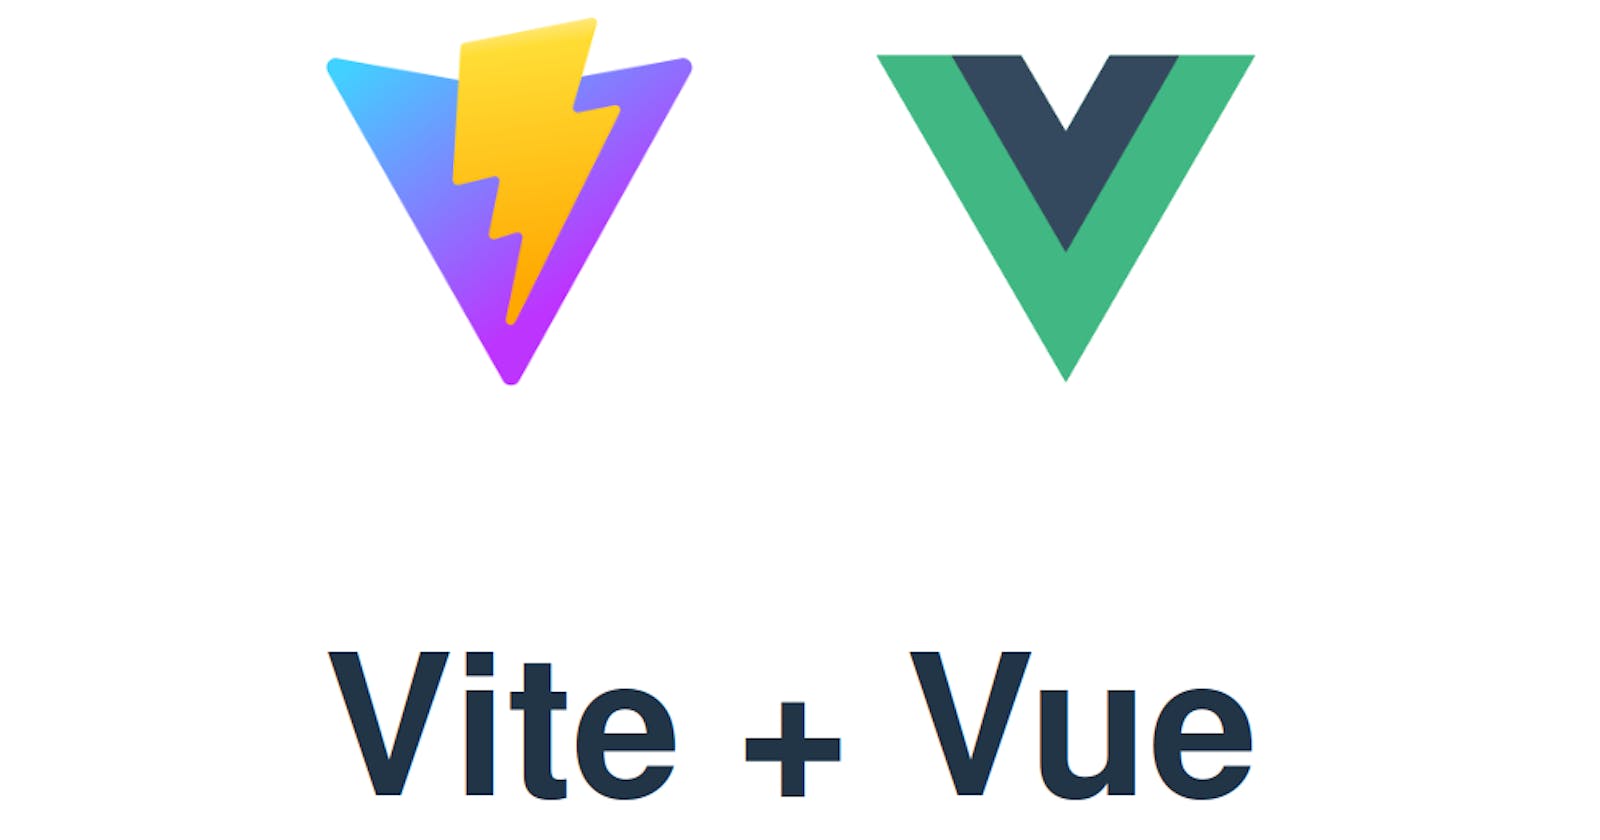 Getting started with Vite and Vue